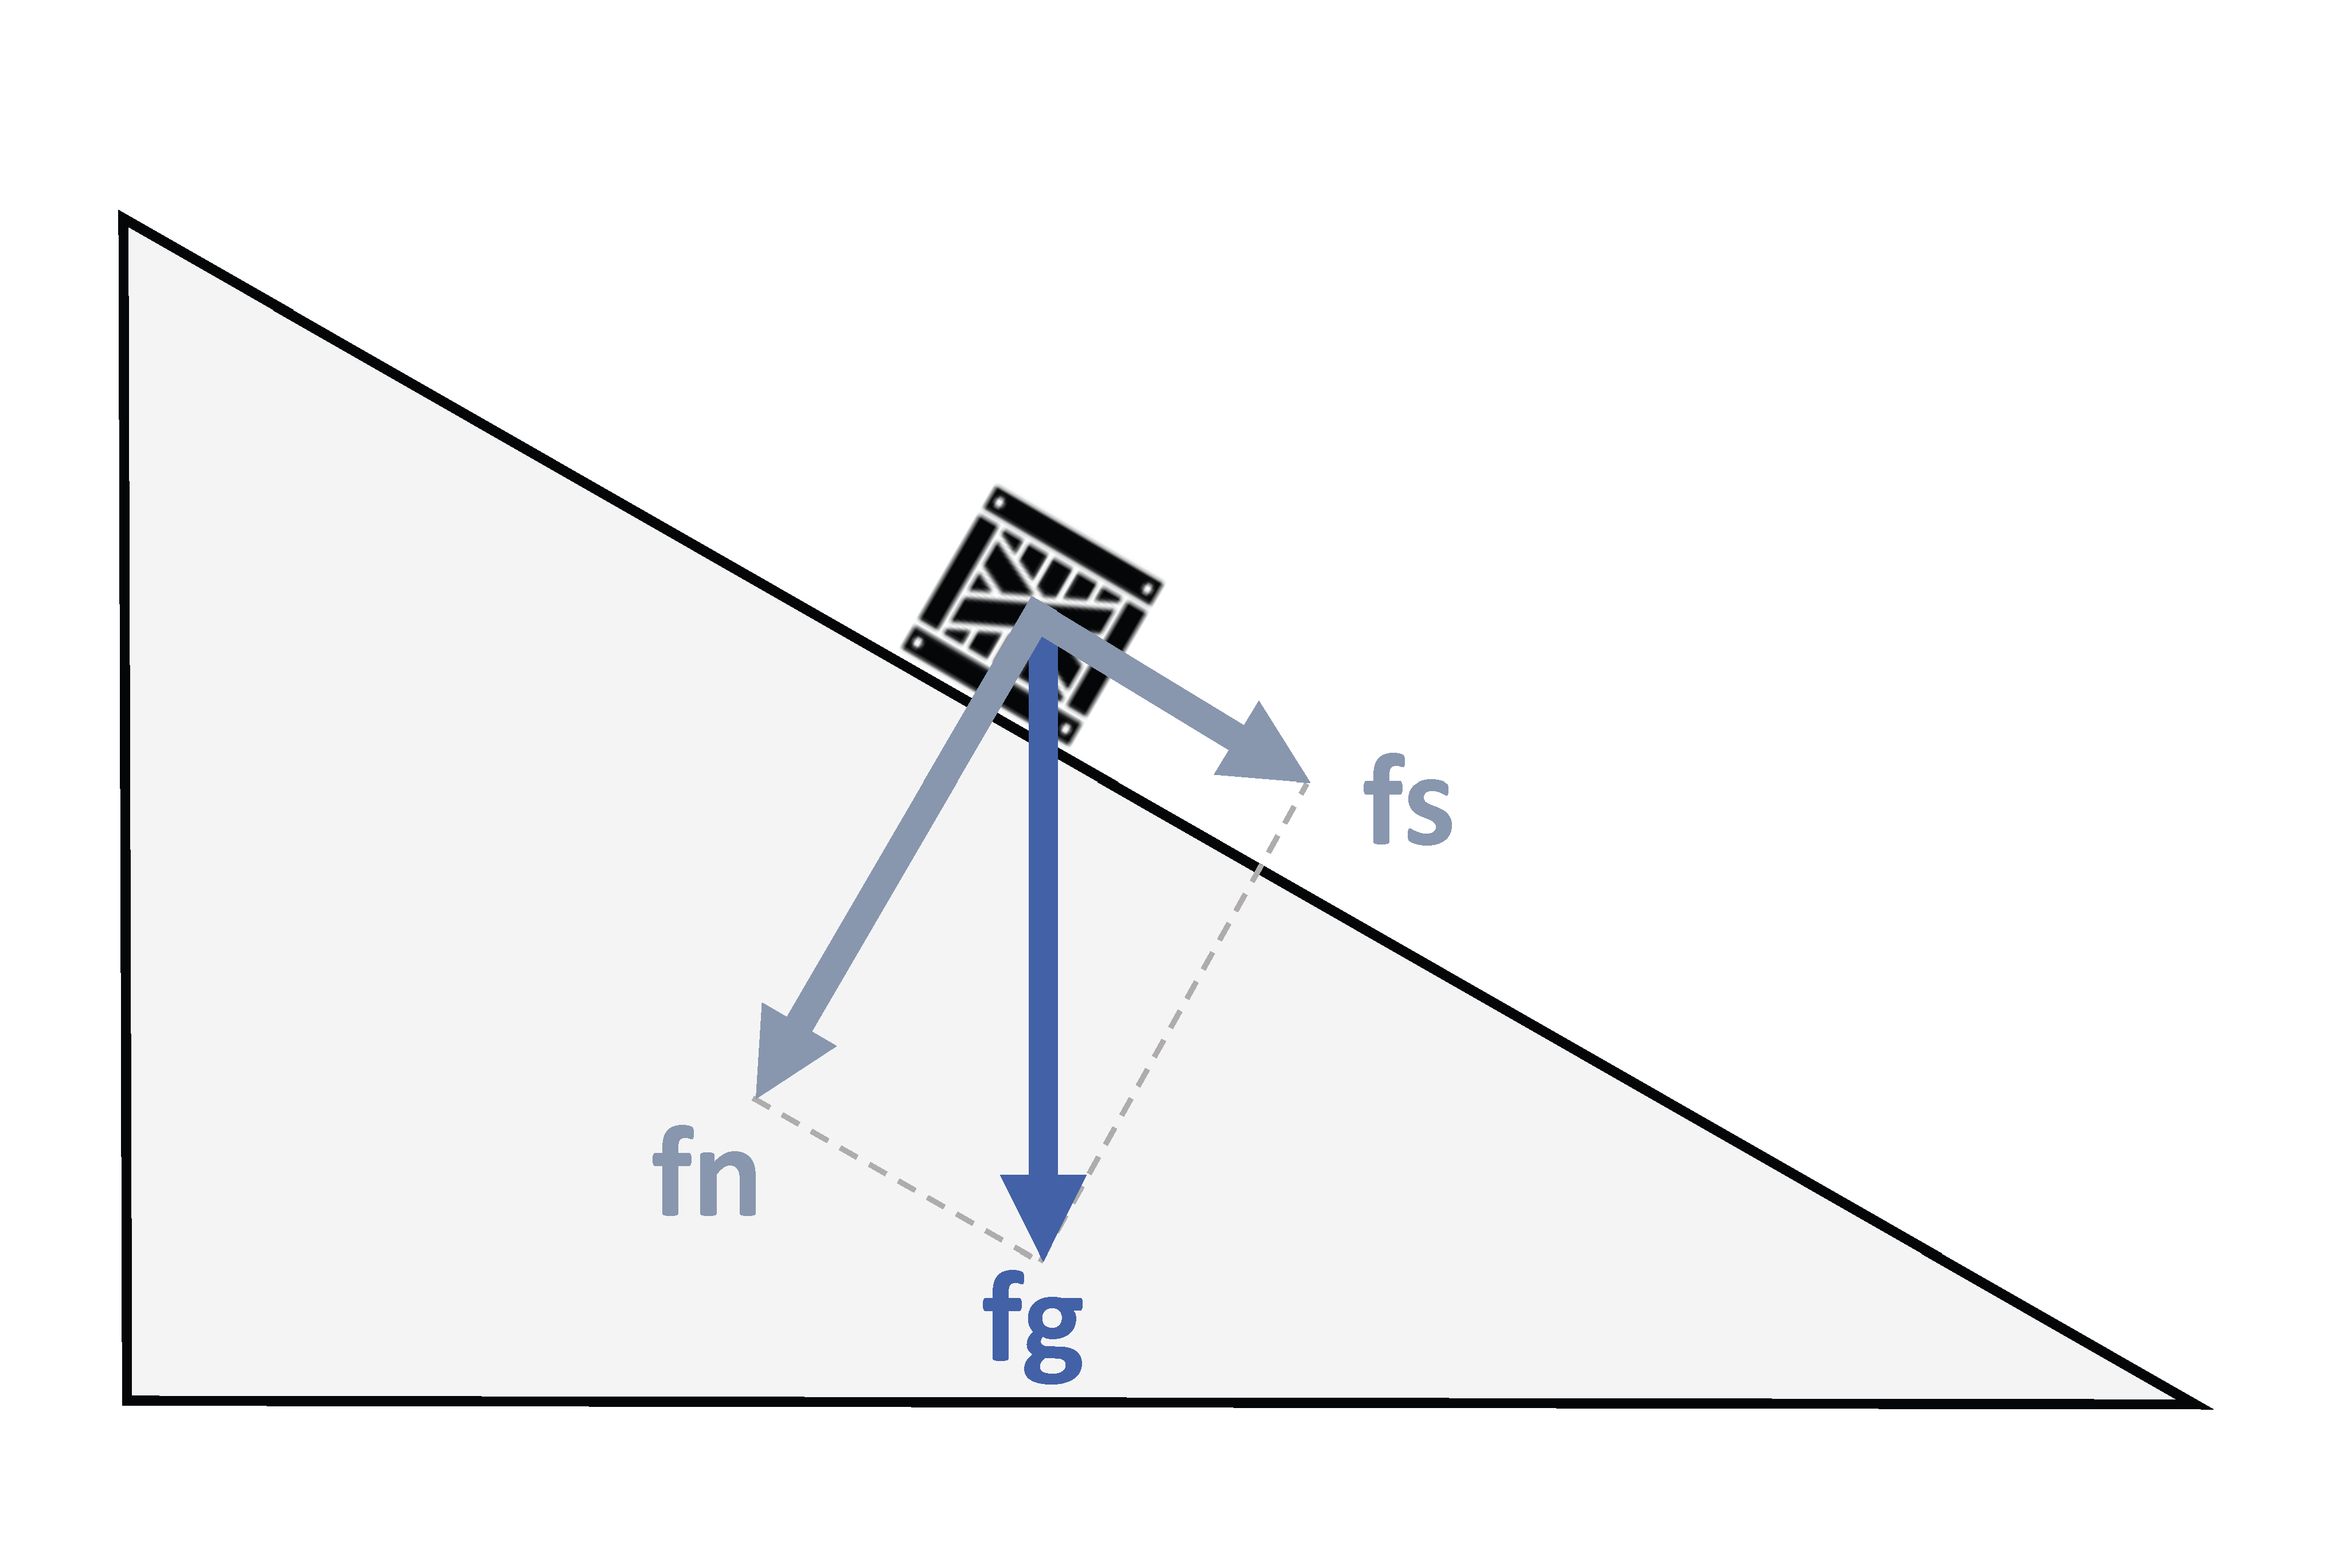 Forces on a block on an inclined plane (fg = force of gravity; fn = normal force; fs = shear force).